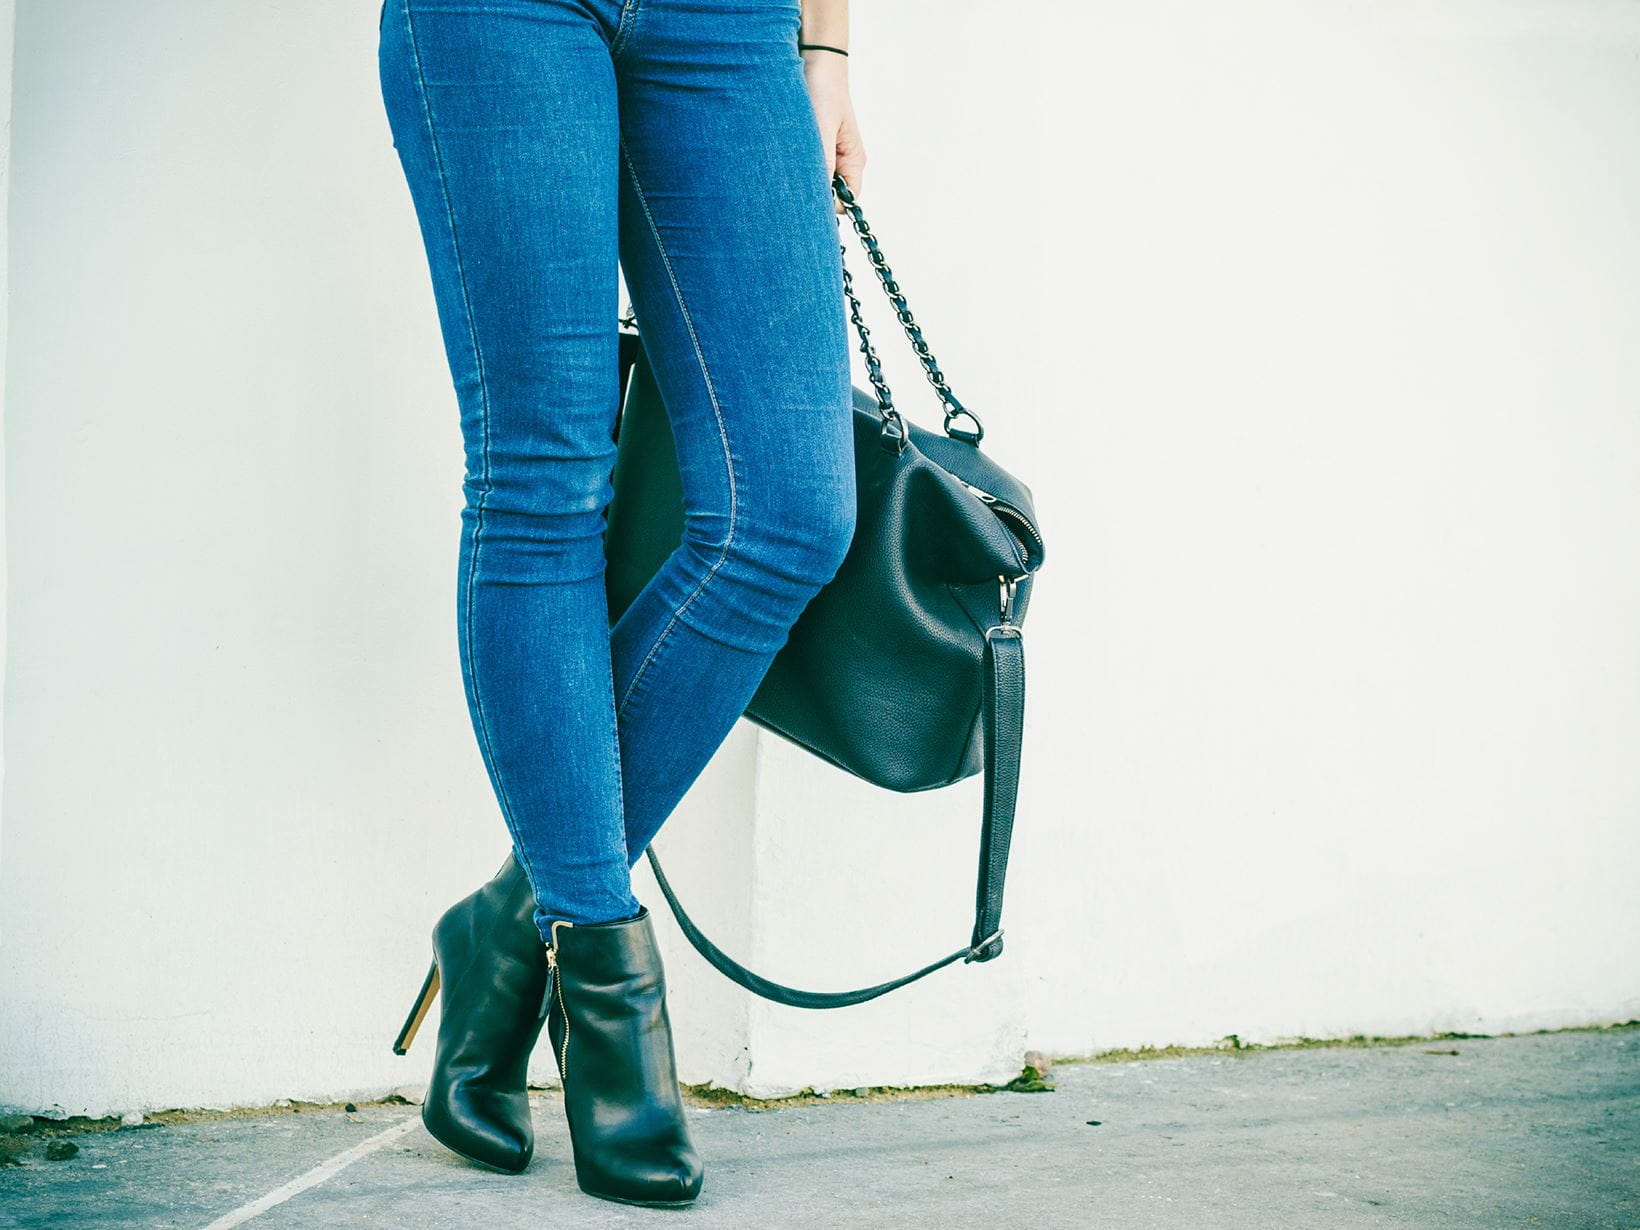 women wearing jeans with bag